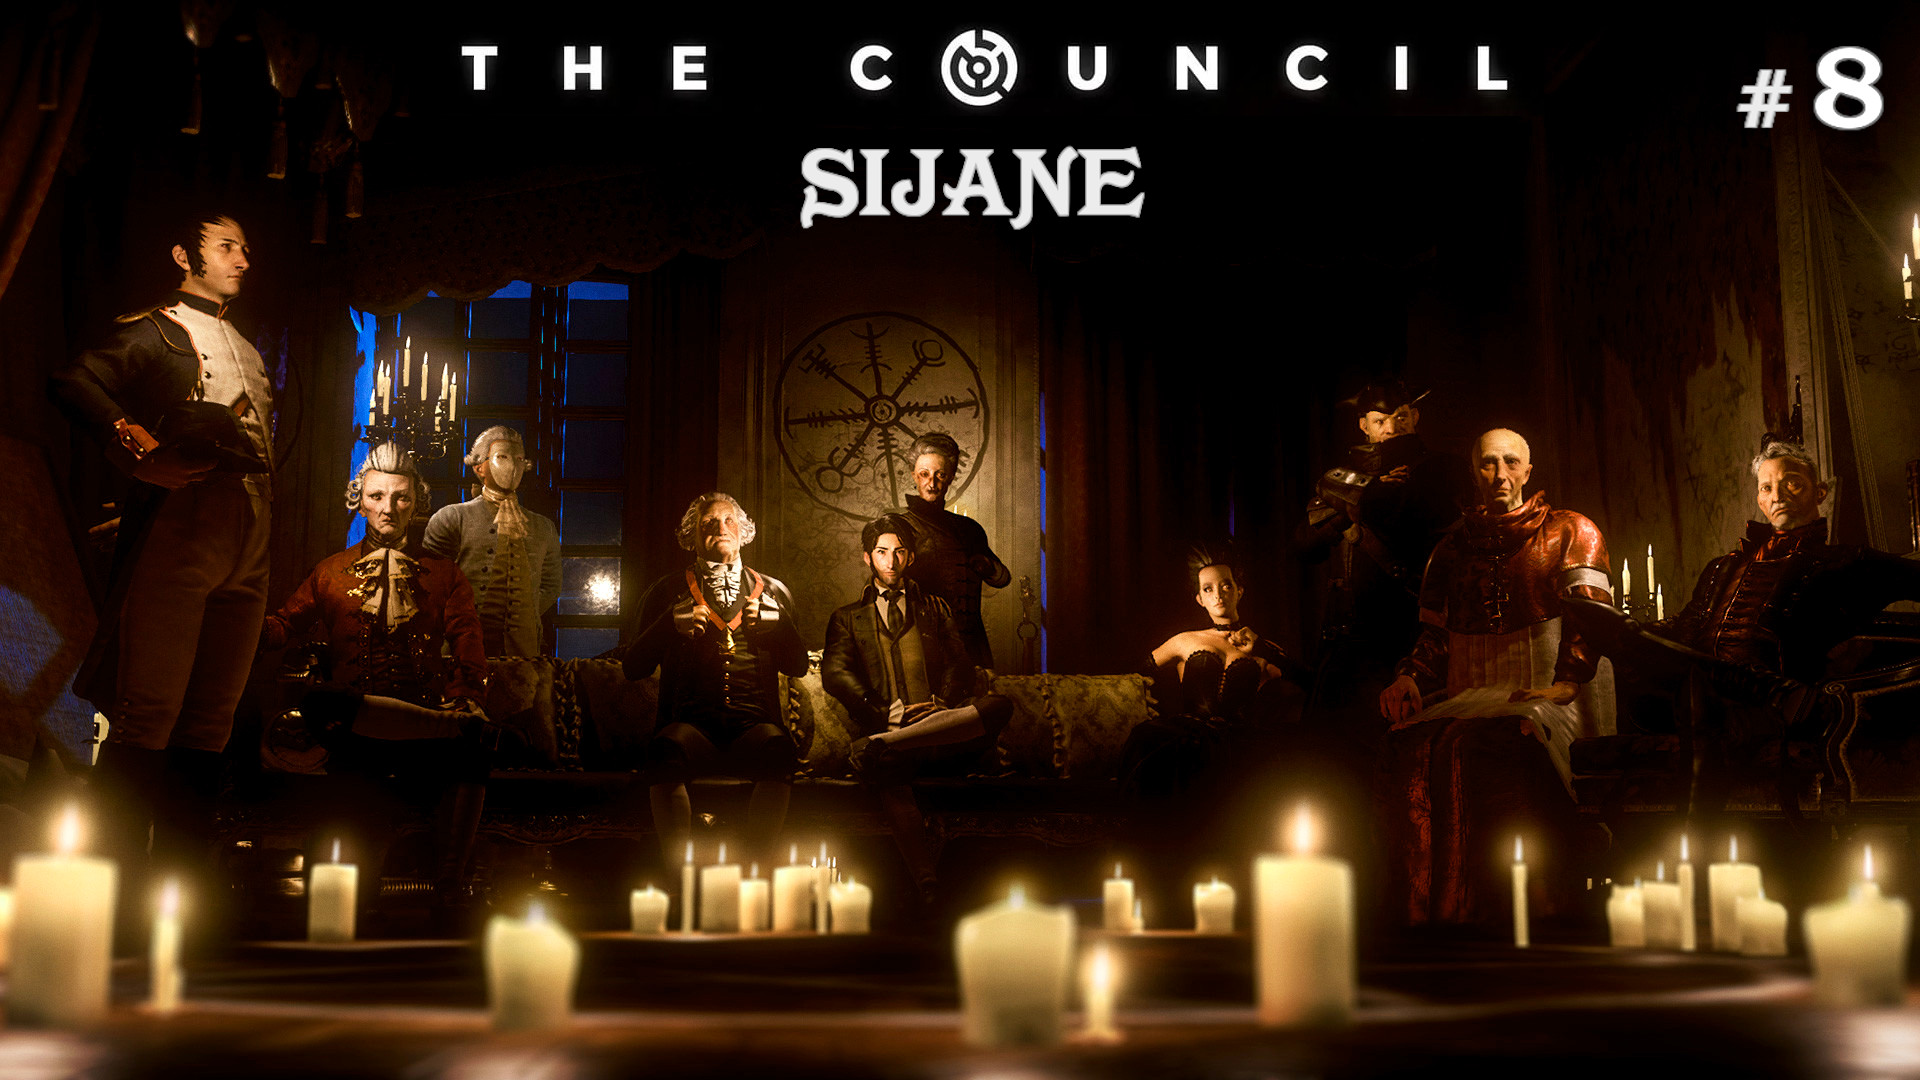 The Council Episode 3 - Ripples #8